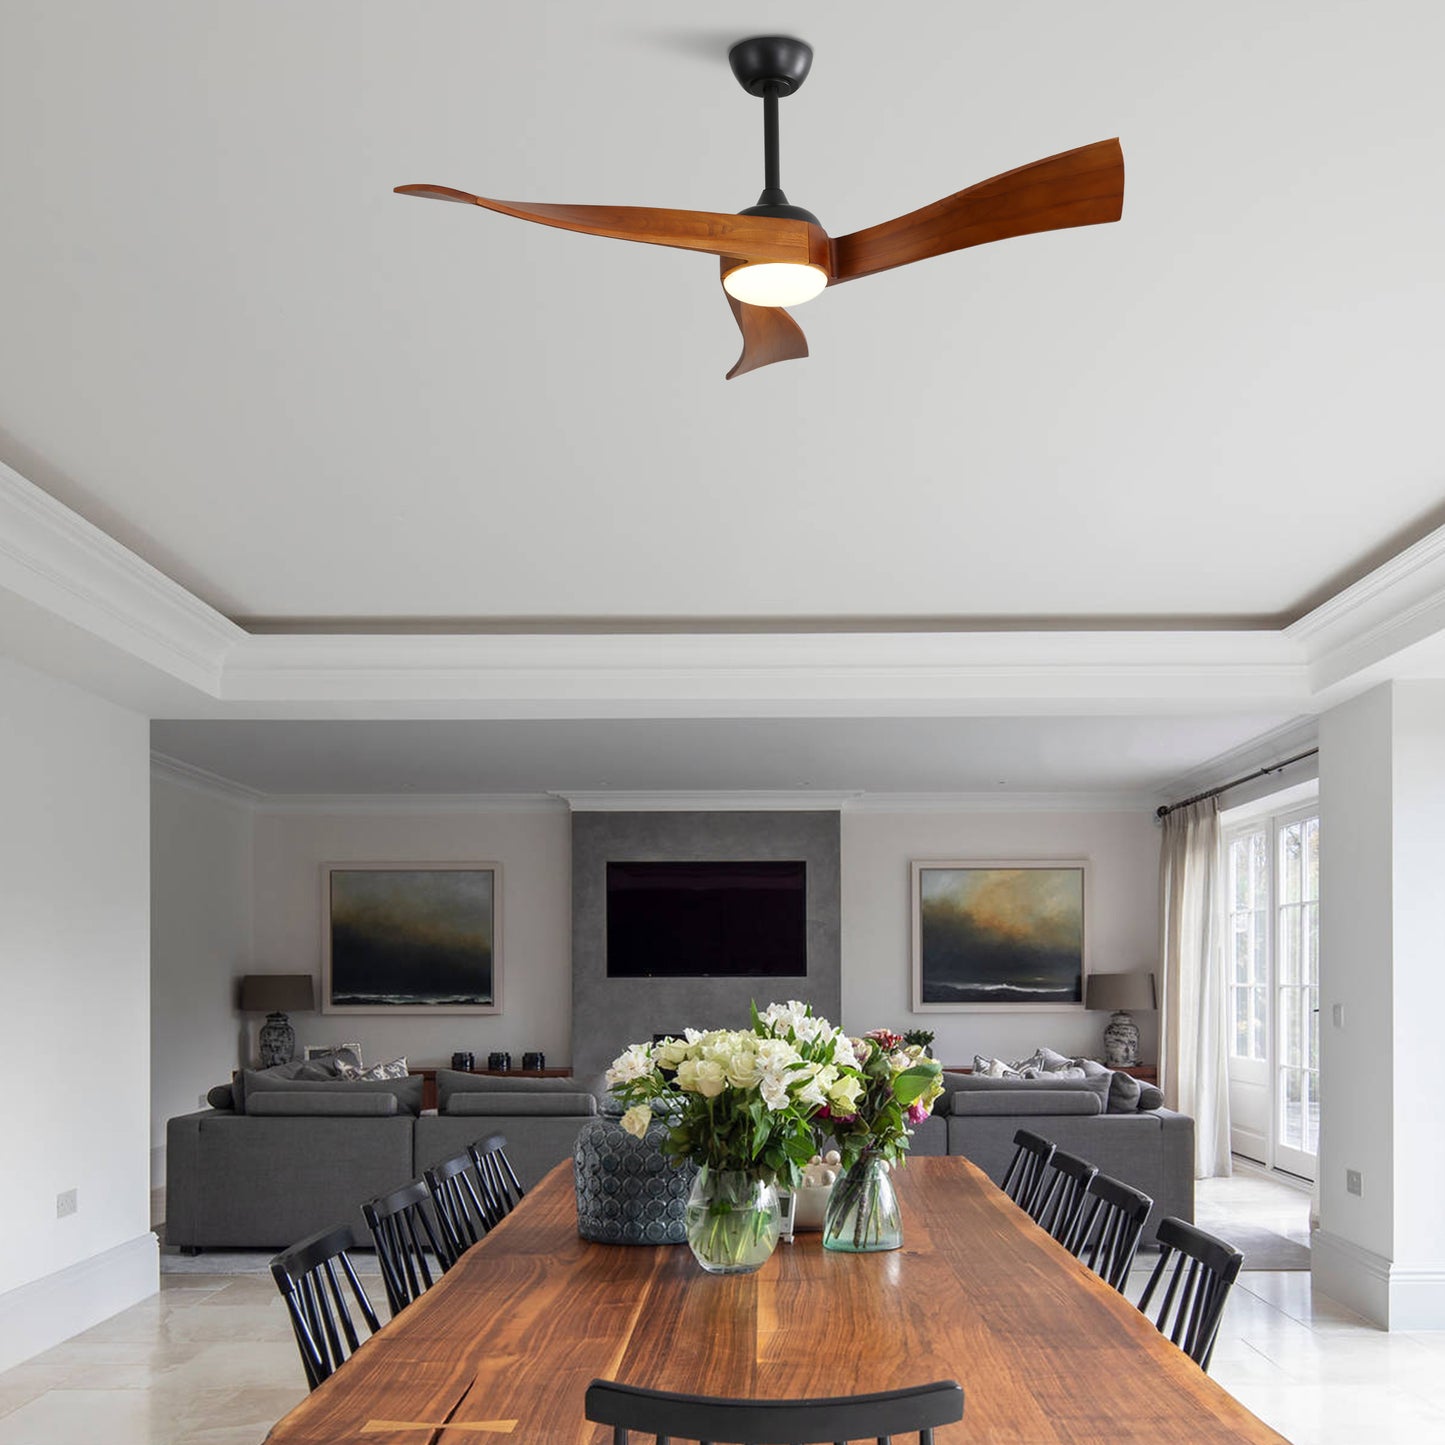 52 Inch Modern Wood Ceiling Fan with Remote Control by DC Motor